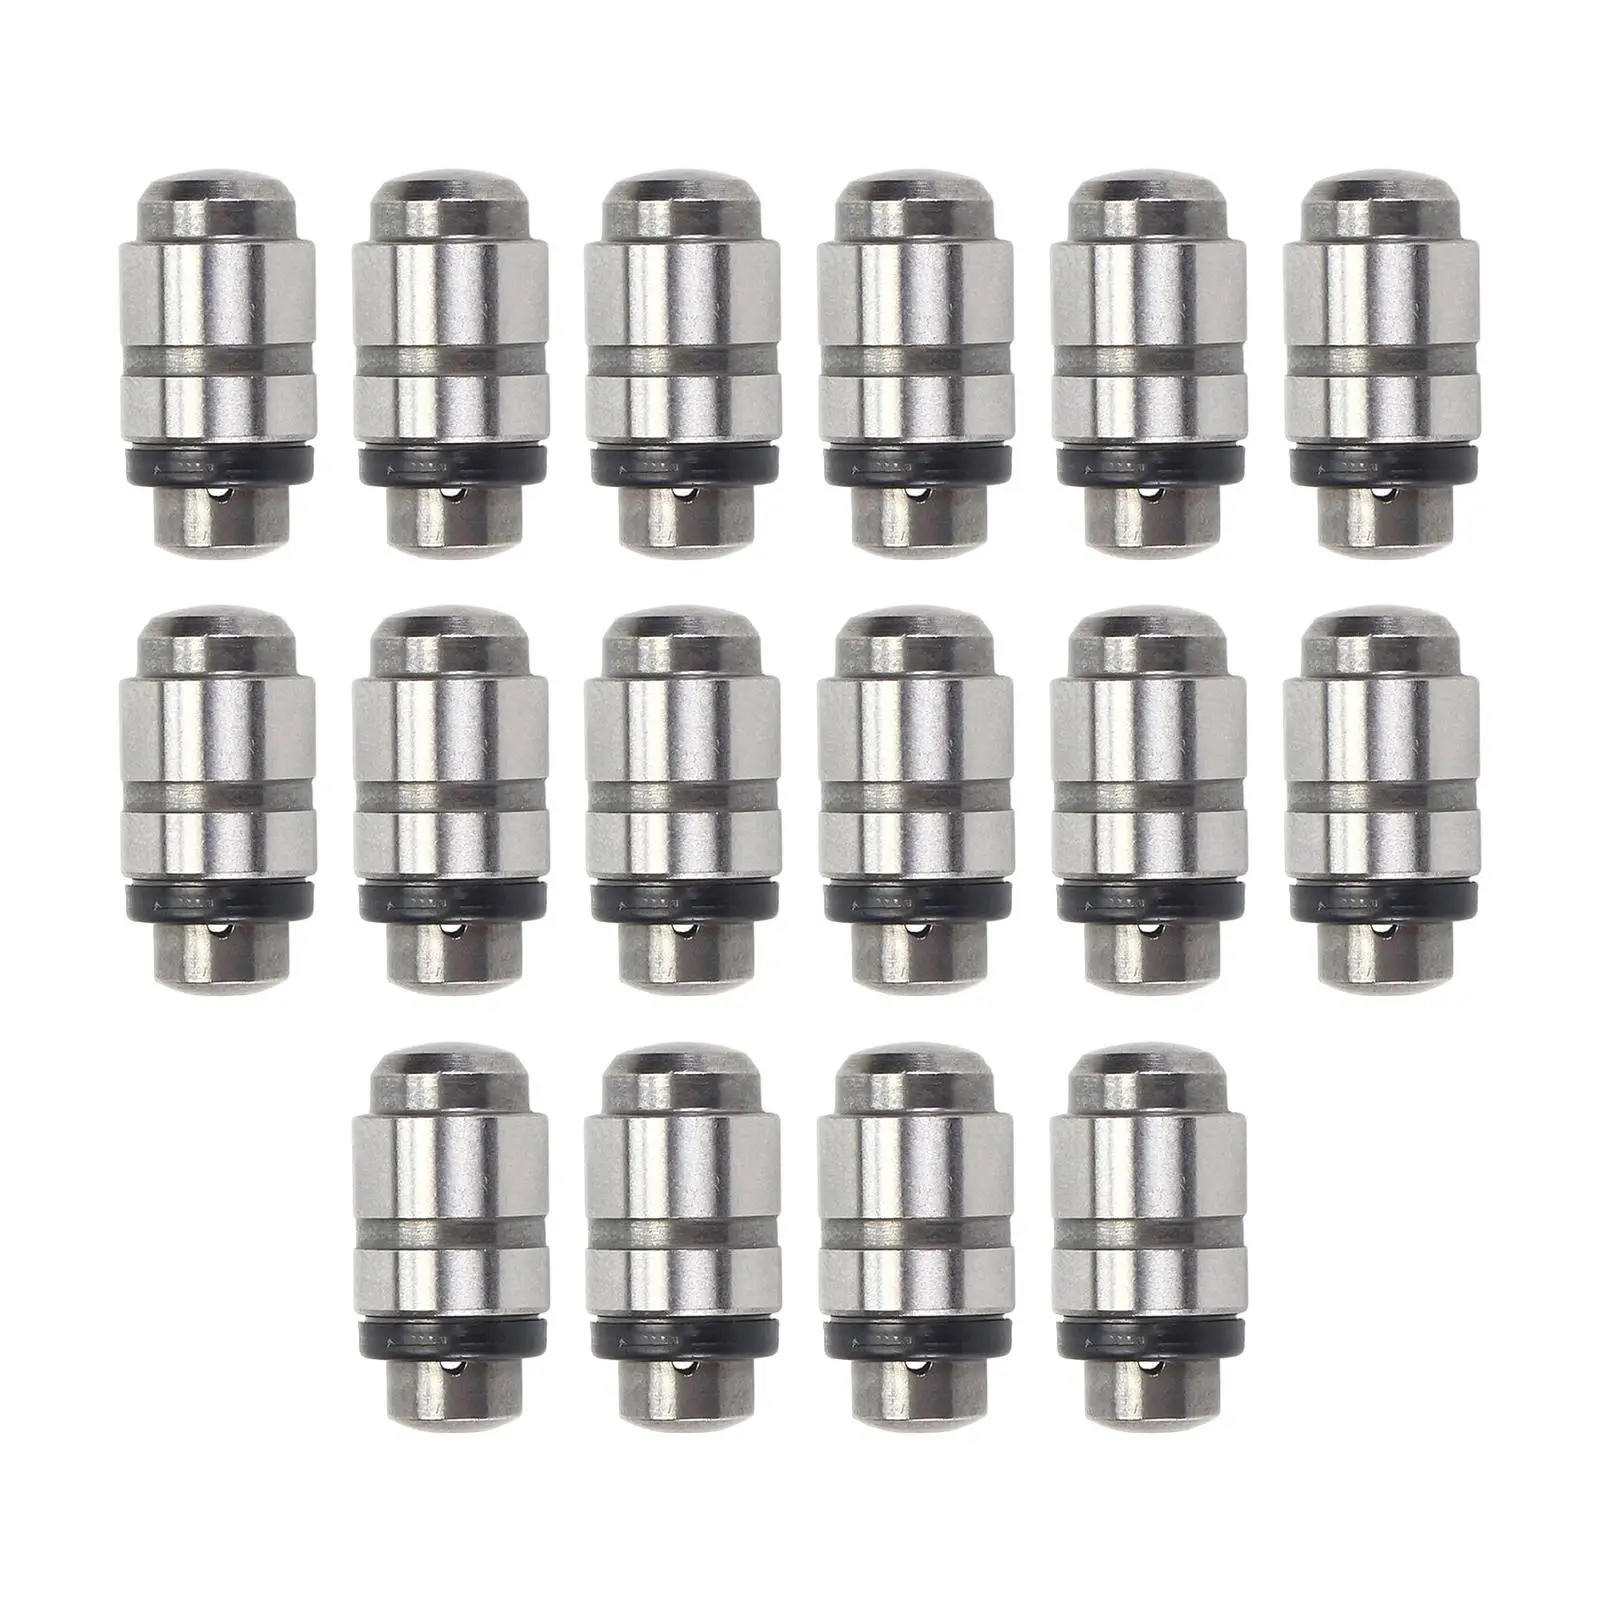 Set of 16 Valve Tappets Lifters Kit Auto Parts Silver Assemblies Replaces Fit for Mitsubishi 2.5L 3.0L 2131753 Car Supplies